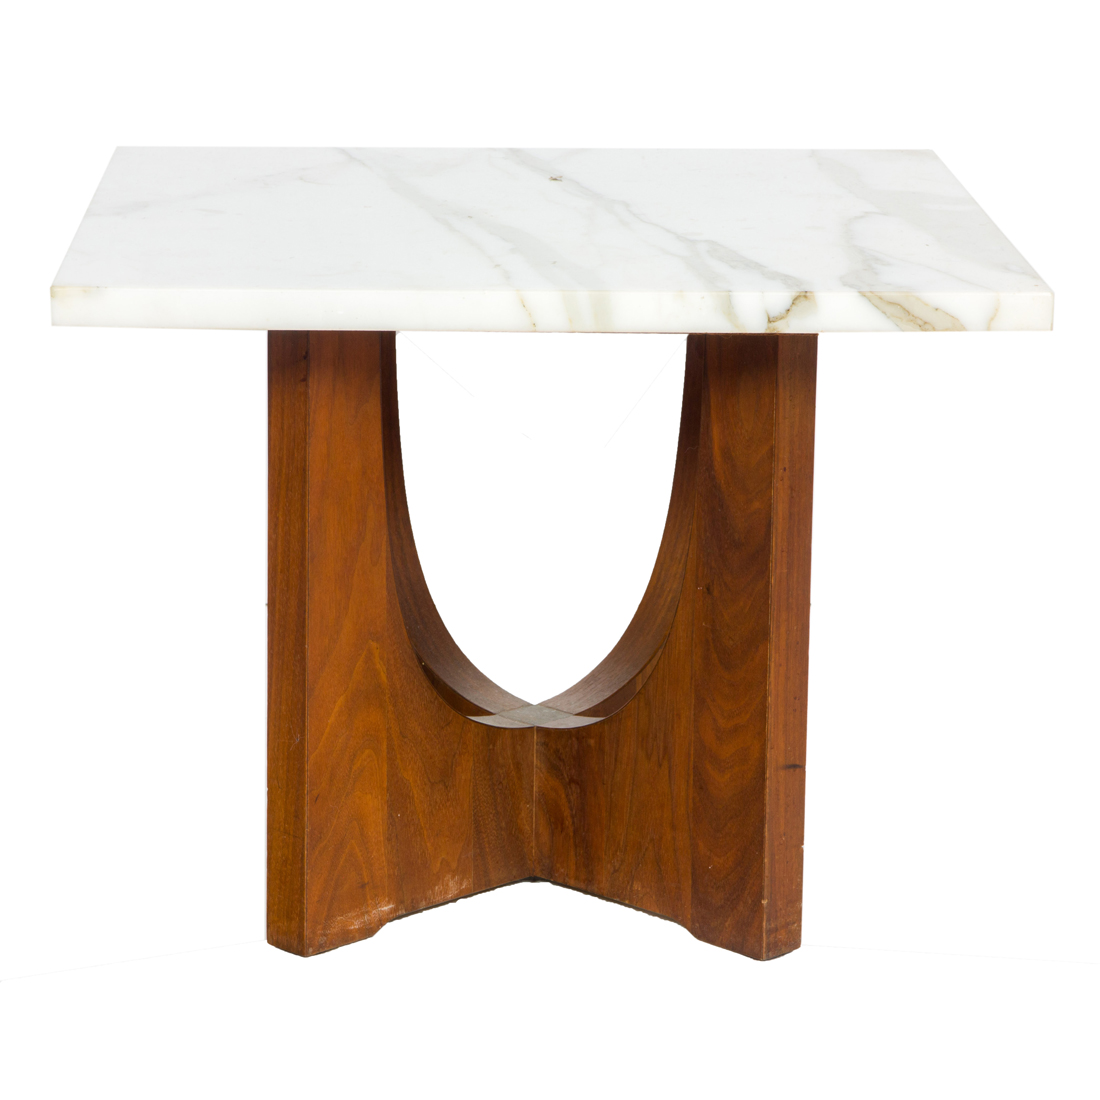 A MODERNIST MARBLE TOP OCCASIONAL